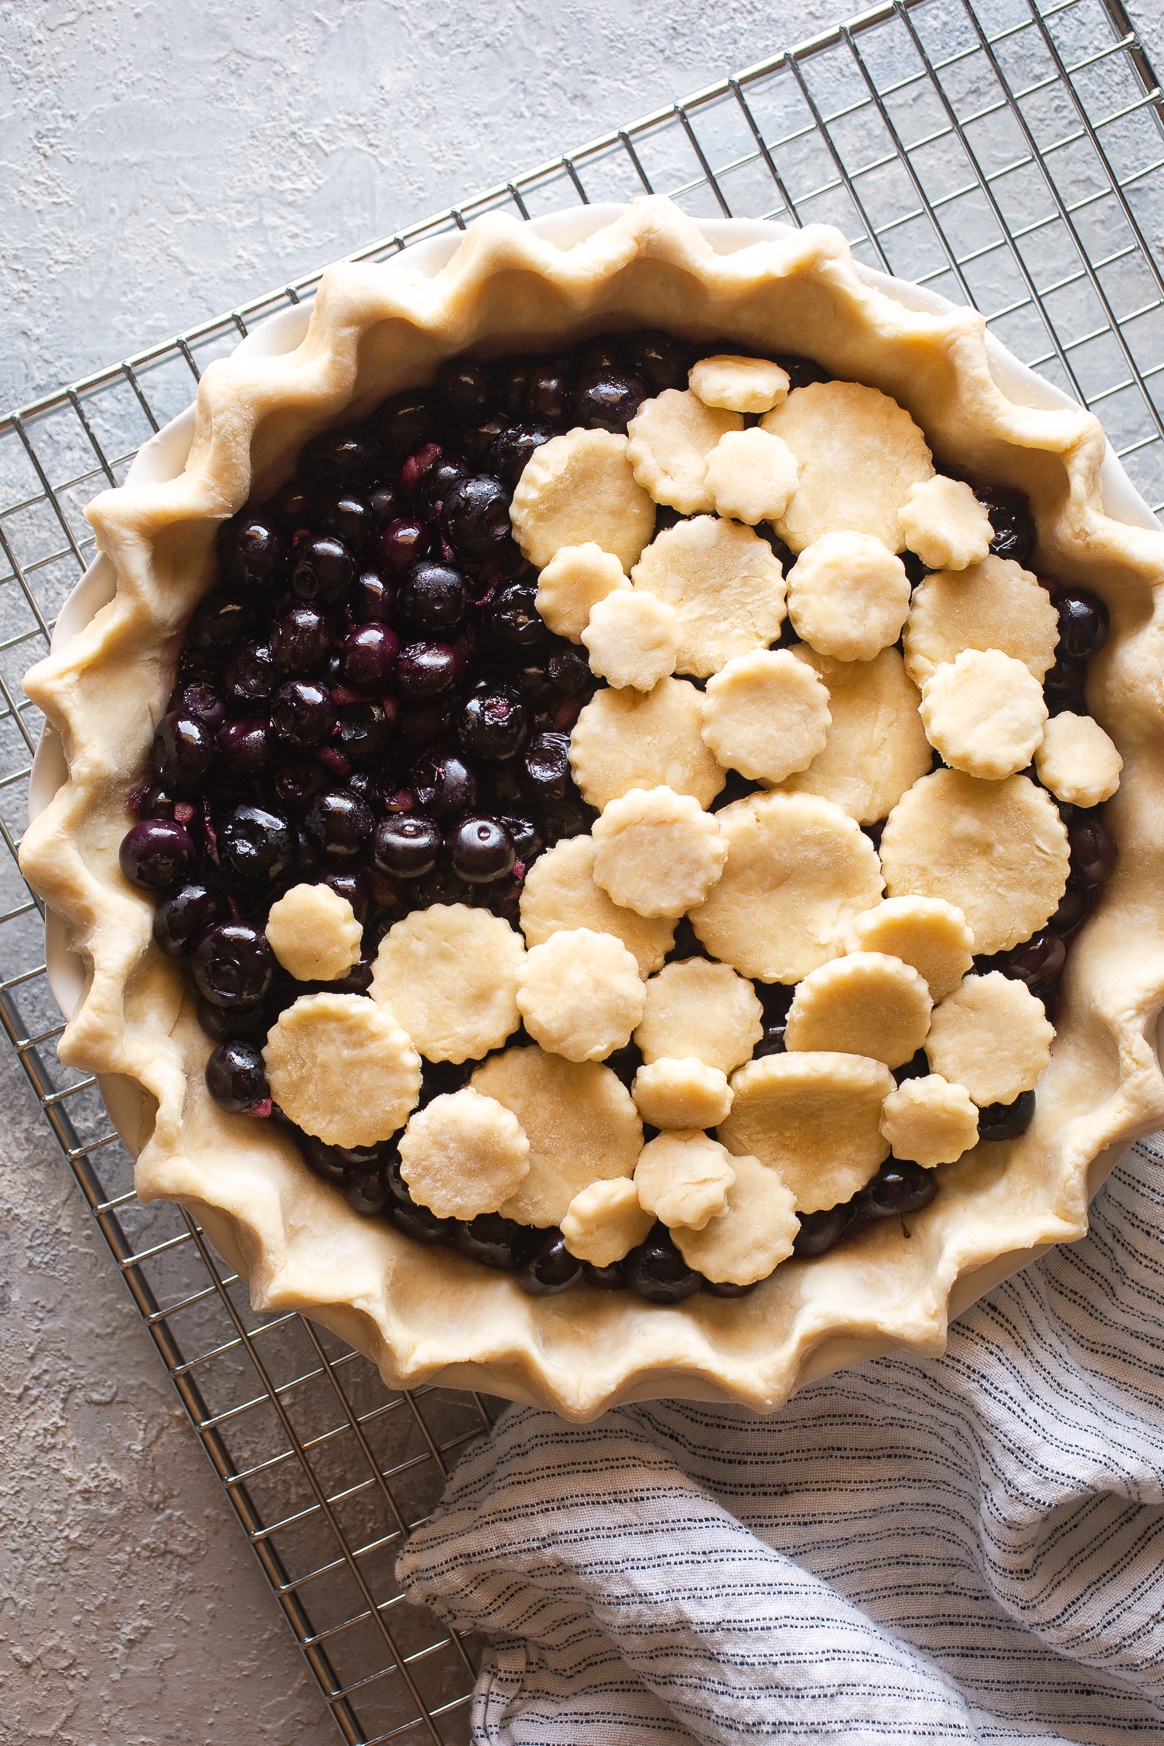 Making a Blueberry Pie